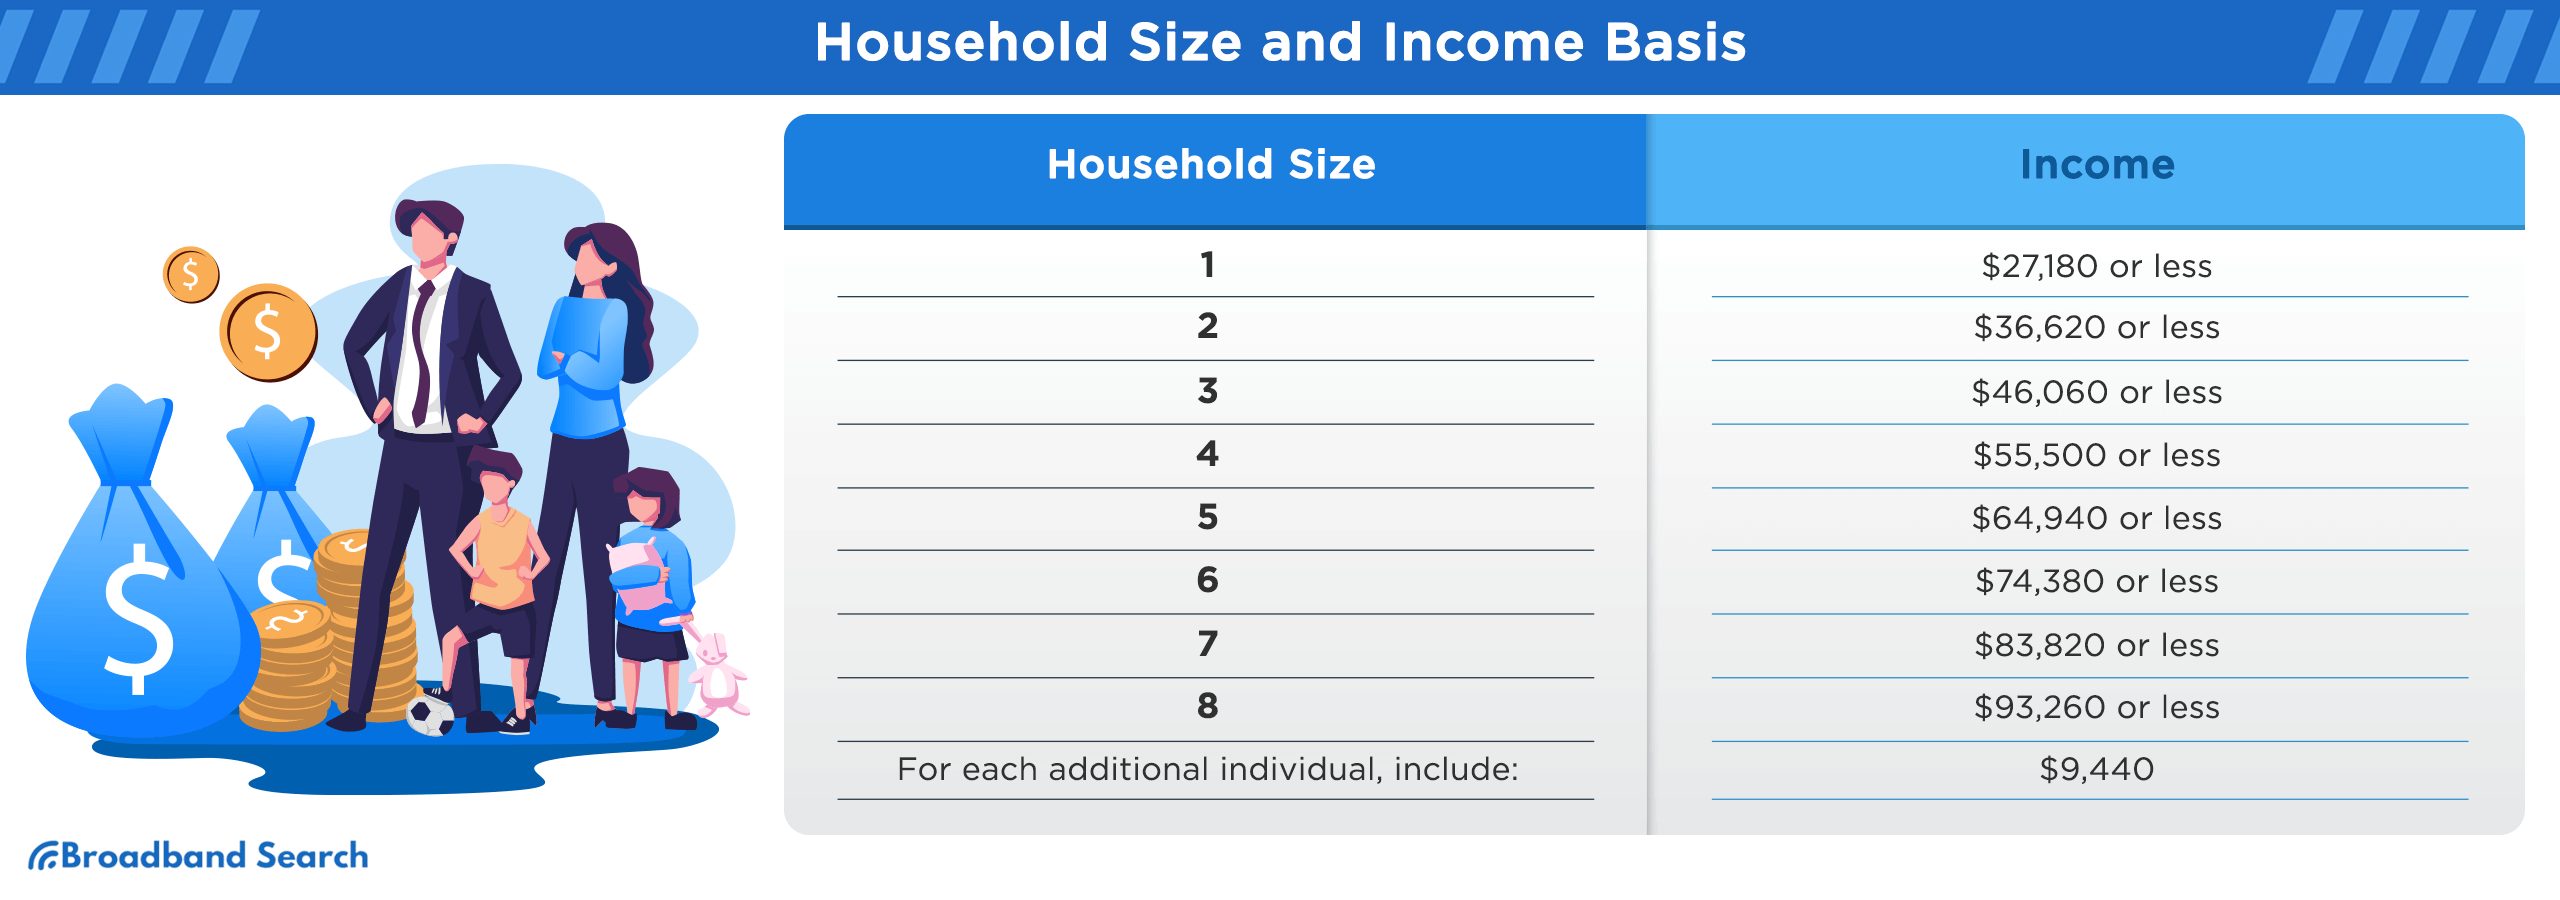 Household size and income basis list to become eligible for the ACP